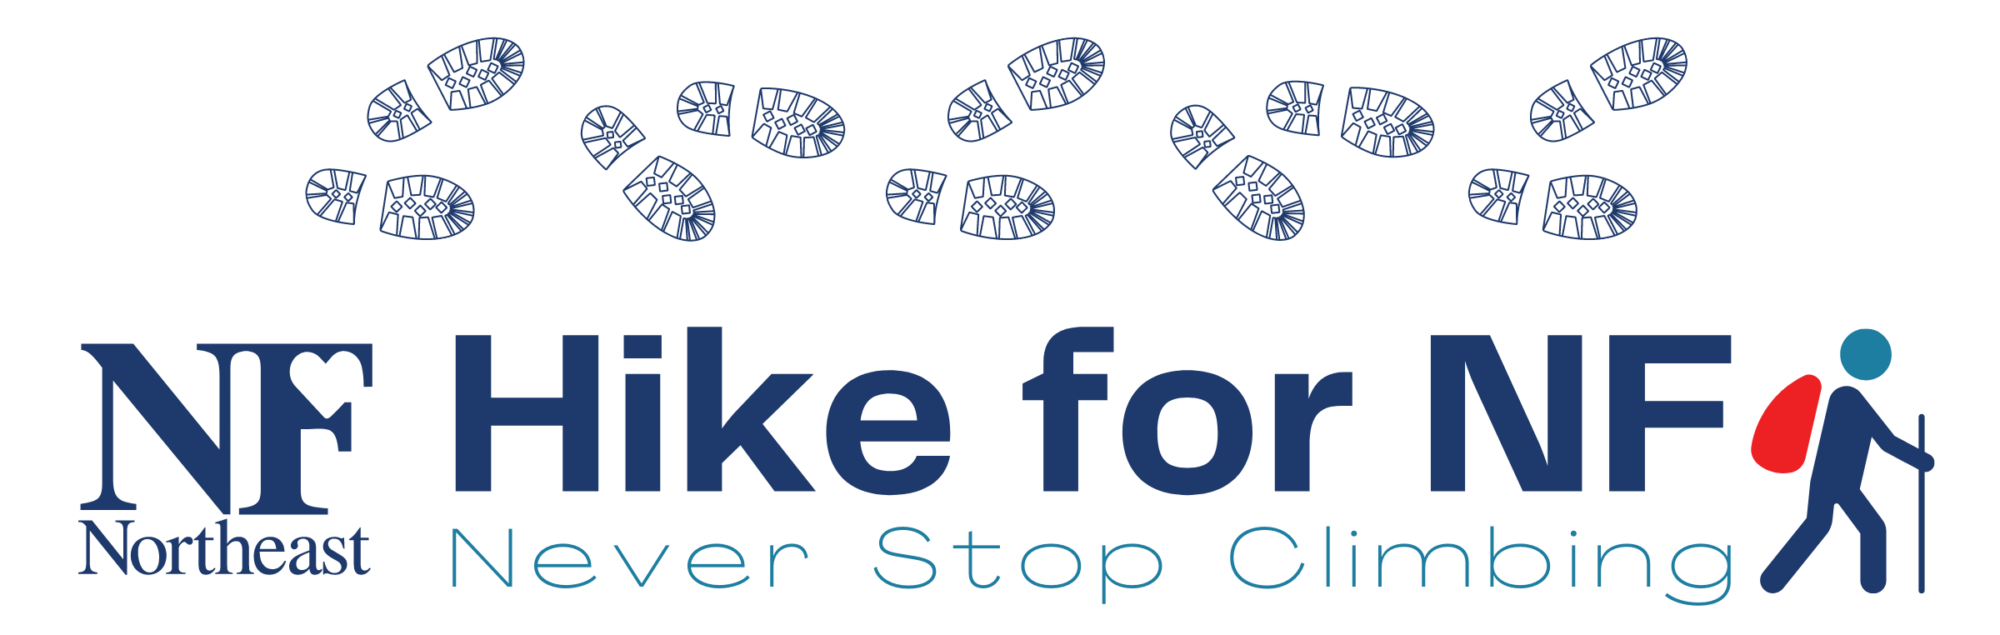 banner that reads "Hike for NF" with graphic motif of hiking boot foot prints and a hiker with a backpack